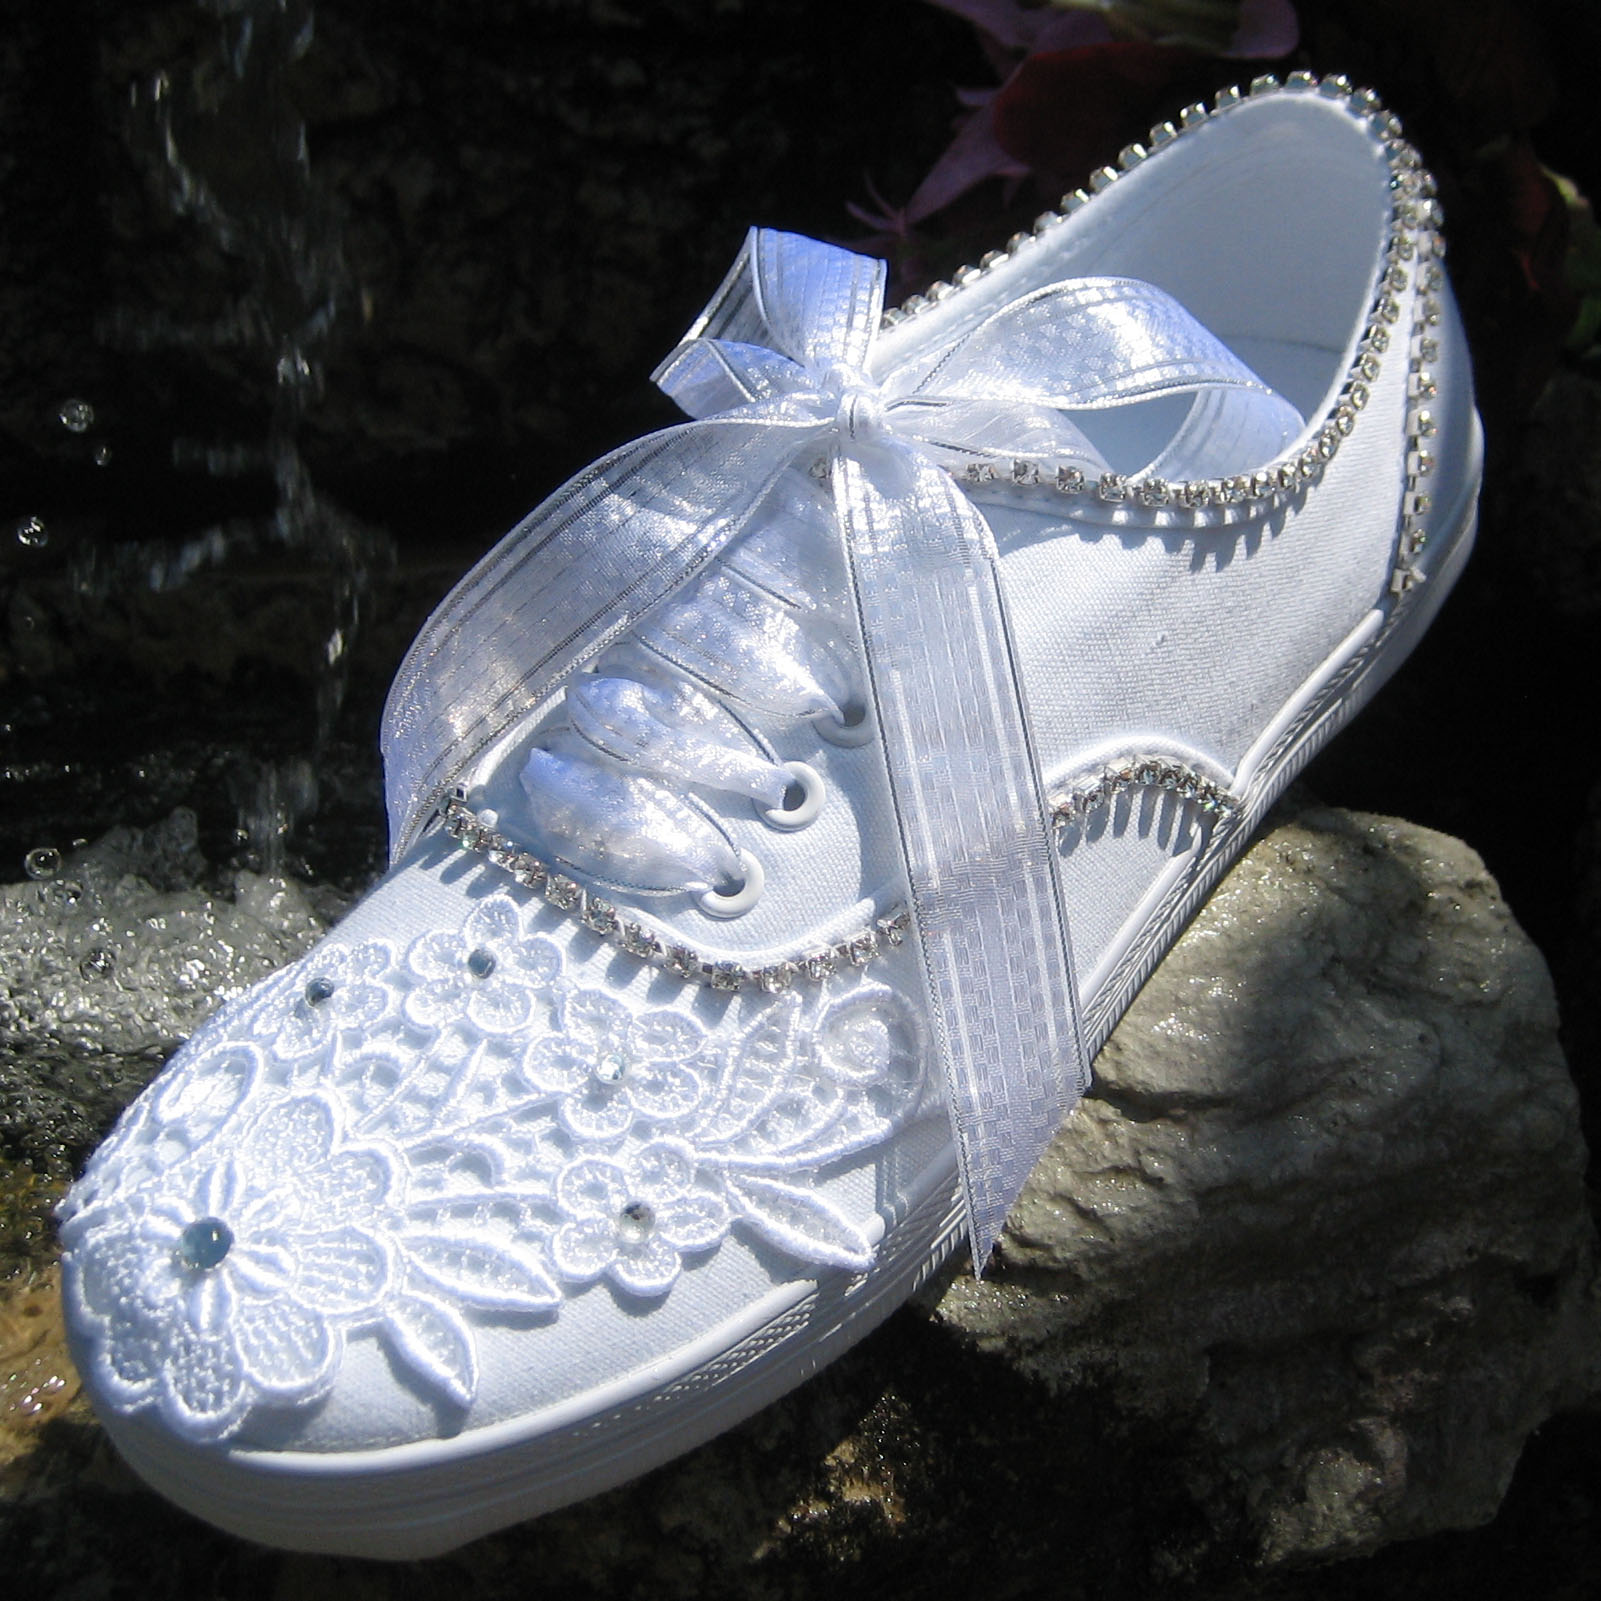 Wedding Tennies and Formal Shoes -- Comfortable Tennis Shoes